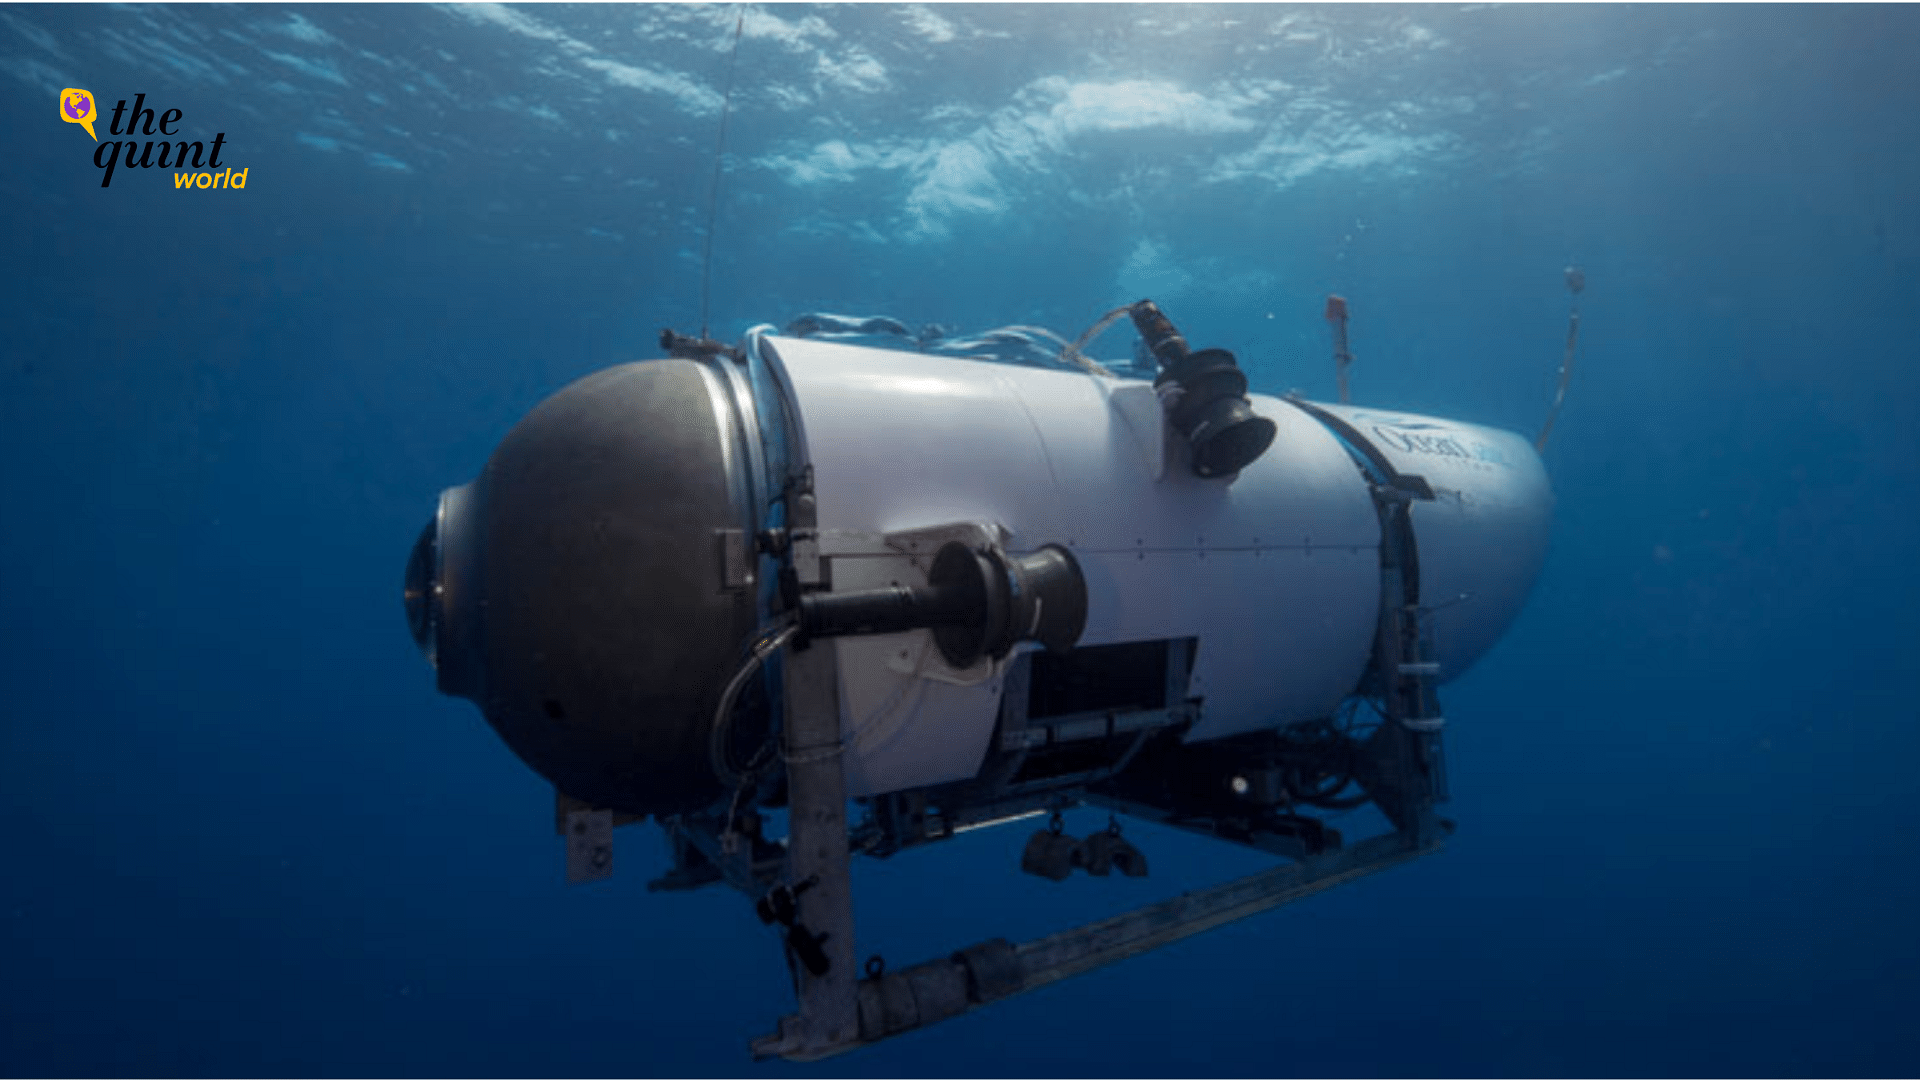 <div class="paragraphs"><p>Despite the recent tragedy&nbsp;that resulted in the loss of five passengers, OceanGate, the company marketing the Titan submersible expedition to the RMS Titanic shipwreck, continues to advertise upcoming journeys to the underwater ruins on its website.</p></div>